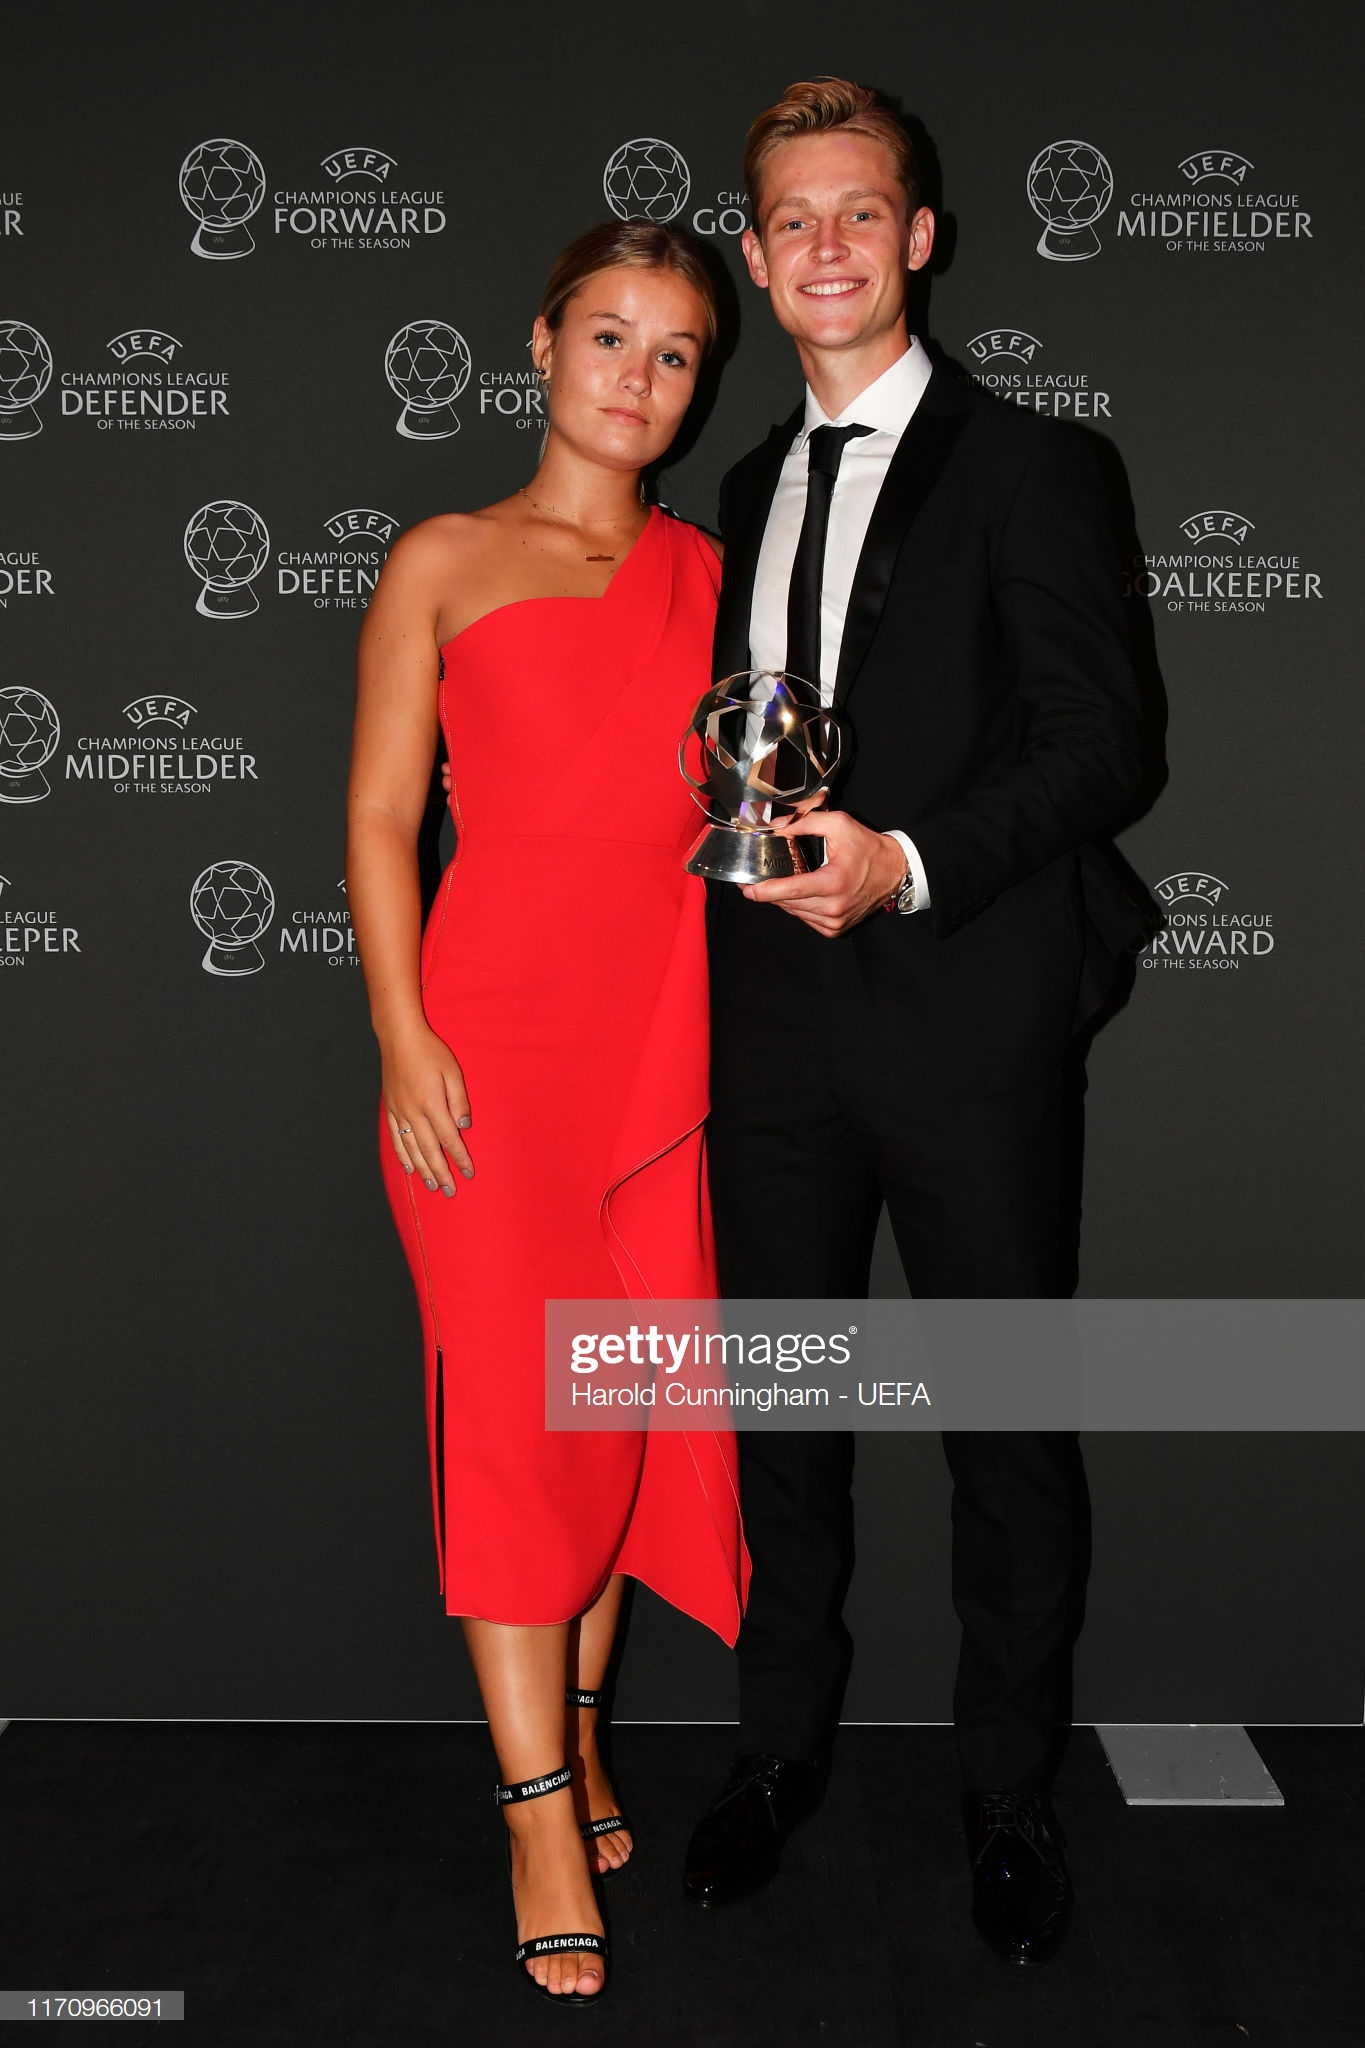 gettyimages-1170966091-2048x2048.jpg